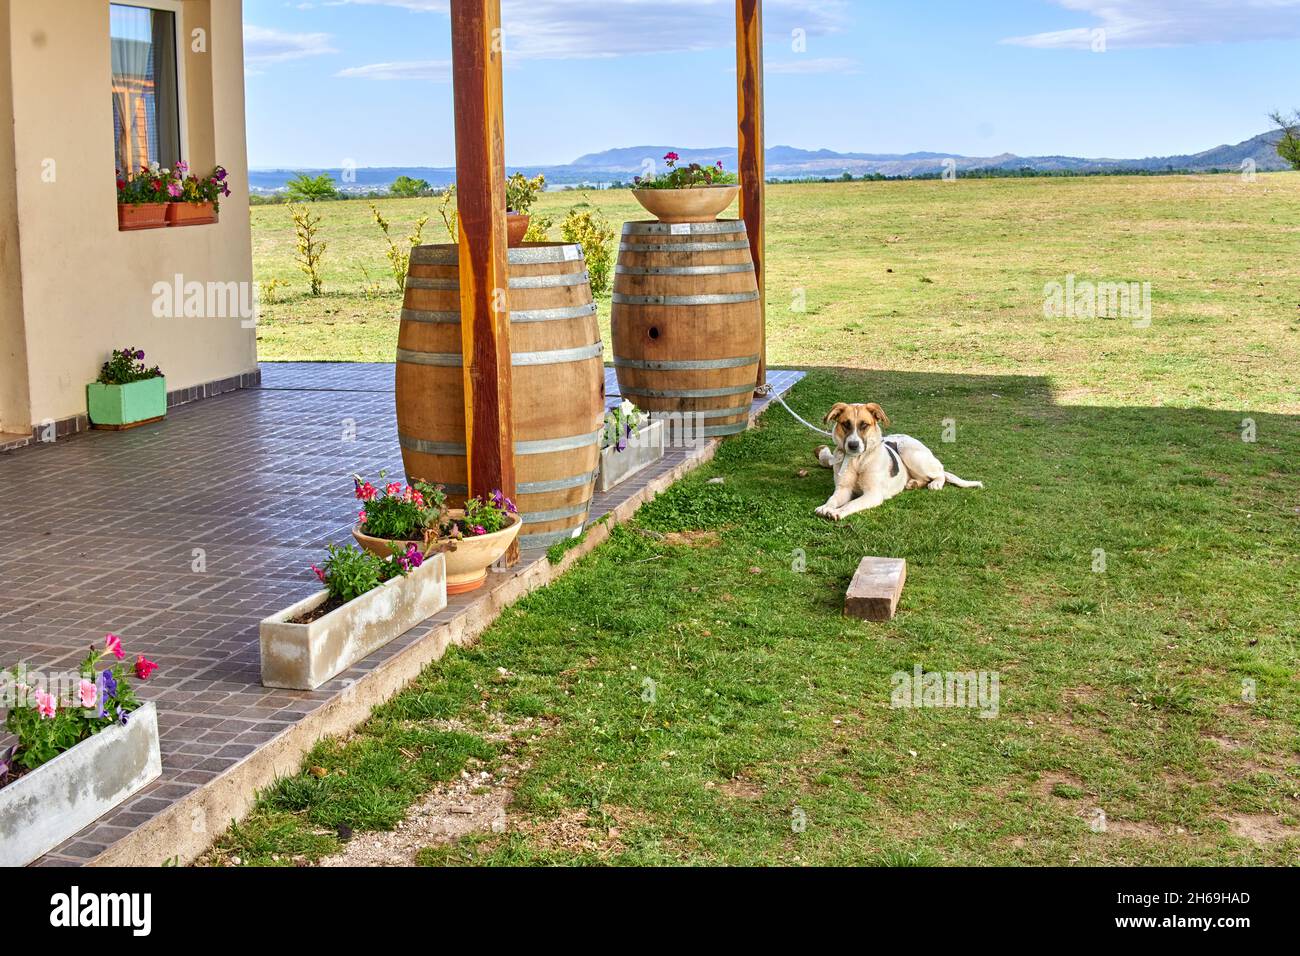 guard dog tied up resting outside a vineyard house in Argentina. Watchdog on a leash protects cellar. horizontal. Mountains in background Stock Photo